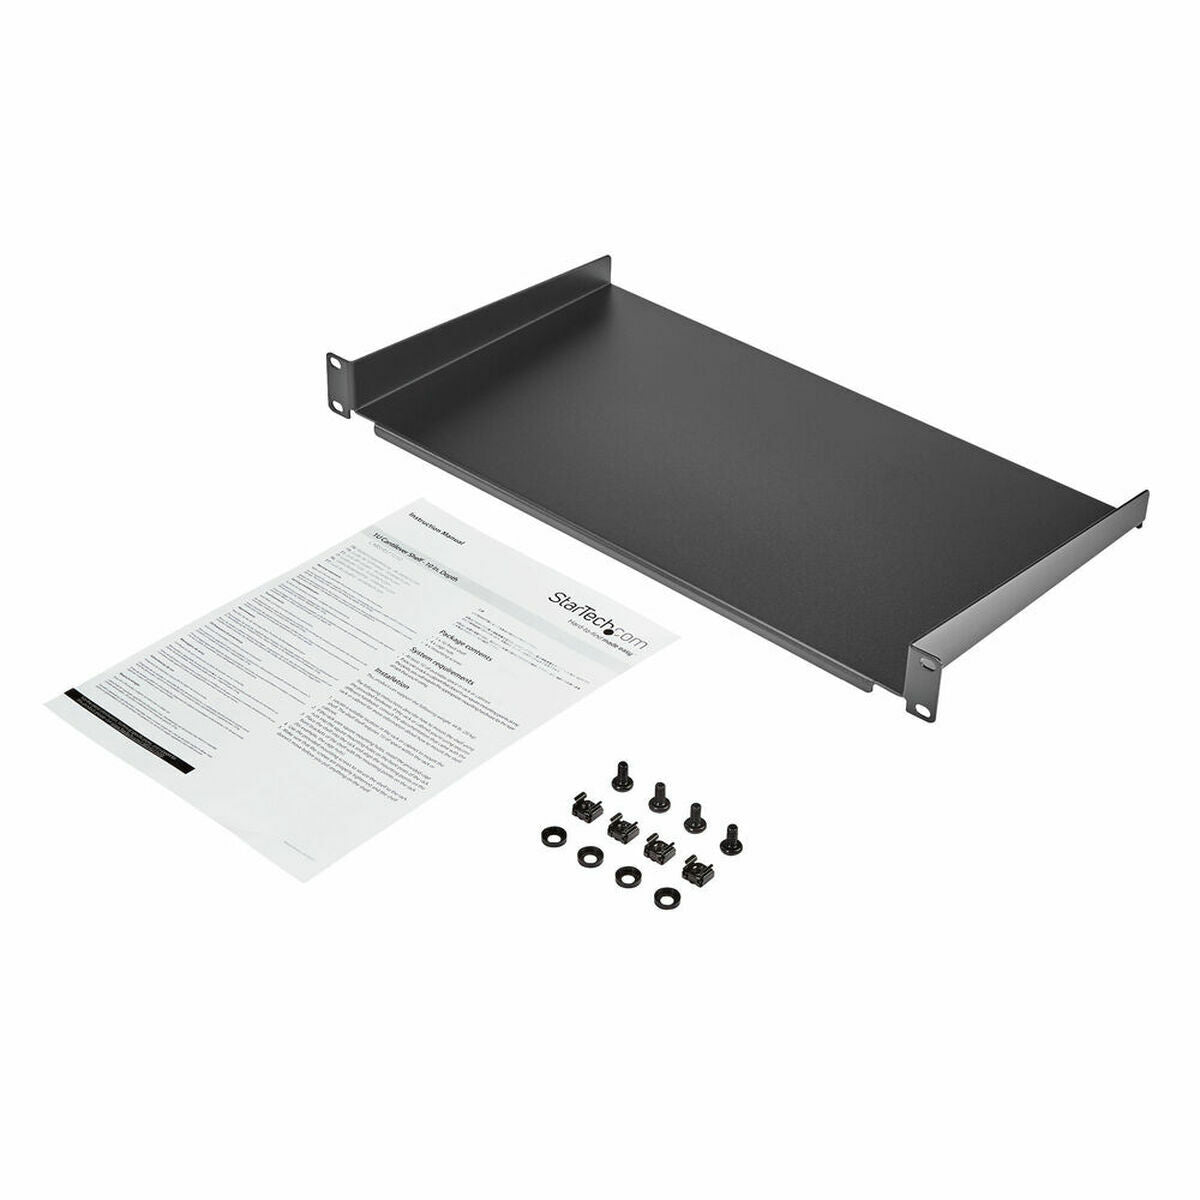 Fixed Tray for Rack Cabinet Startech CABSHELF1U10, Startech, Computing, Accessories, fixed-tray-for-rack-cabinet-startech-cabshelf1u10-1, Brand_Startech, category-reference-2609, category-reference-2803, category-reference-2828, Condition_NEW, furniture, networks/wiring, organisation, Price_50 - 100, Teleworking, RiotNook